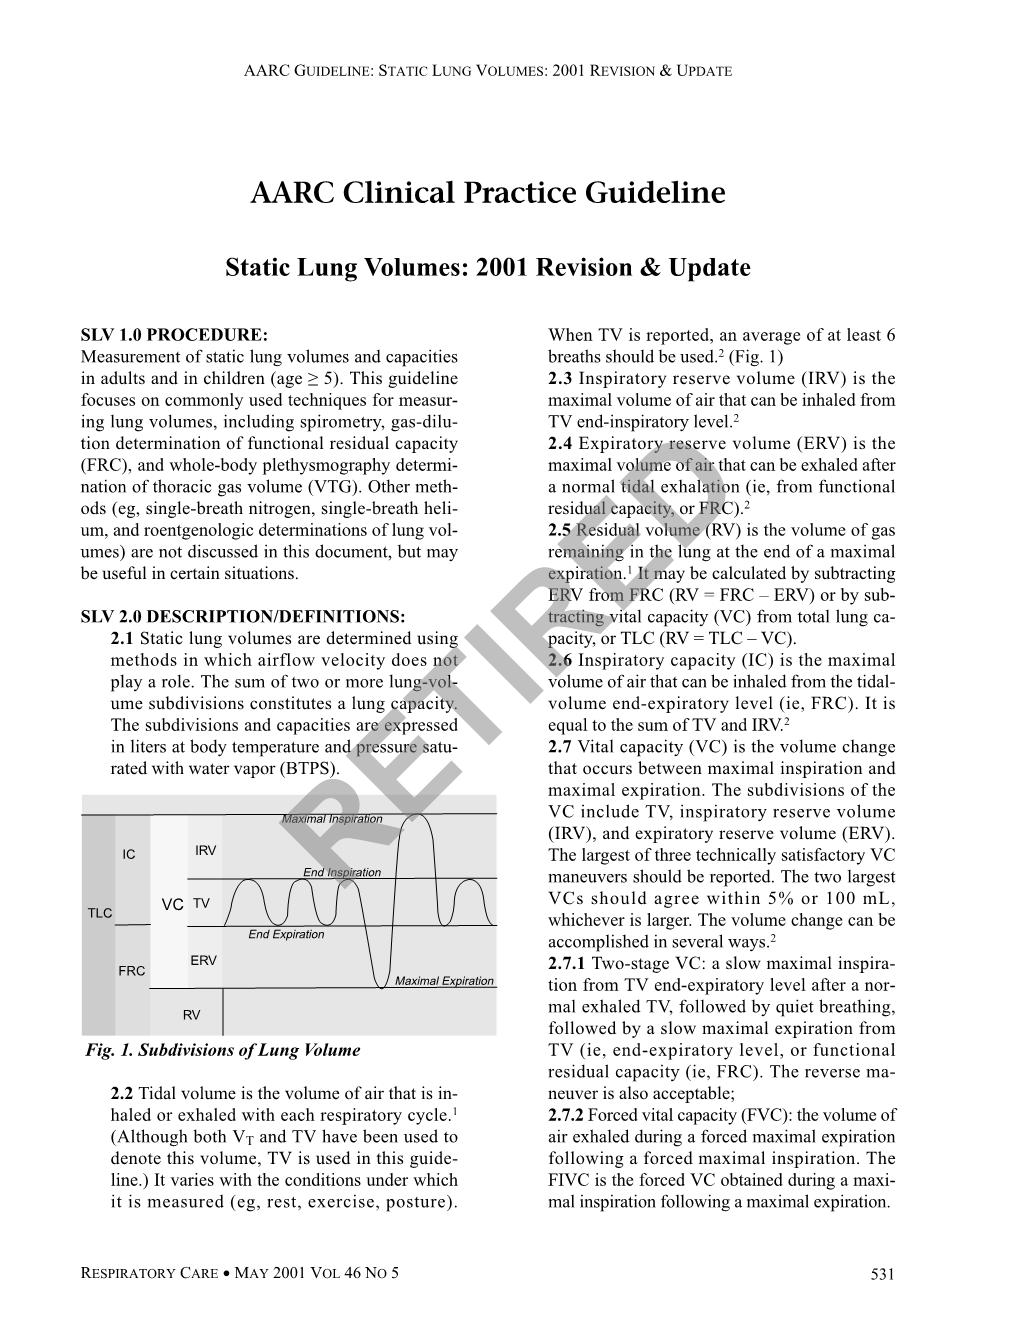 Static Lung Volumes: 2001 Revision & Update